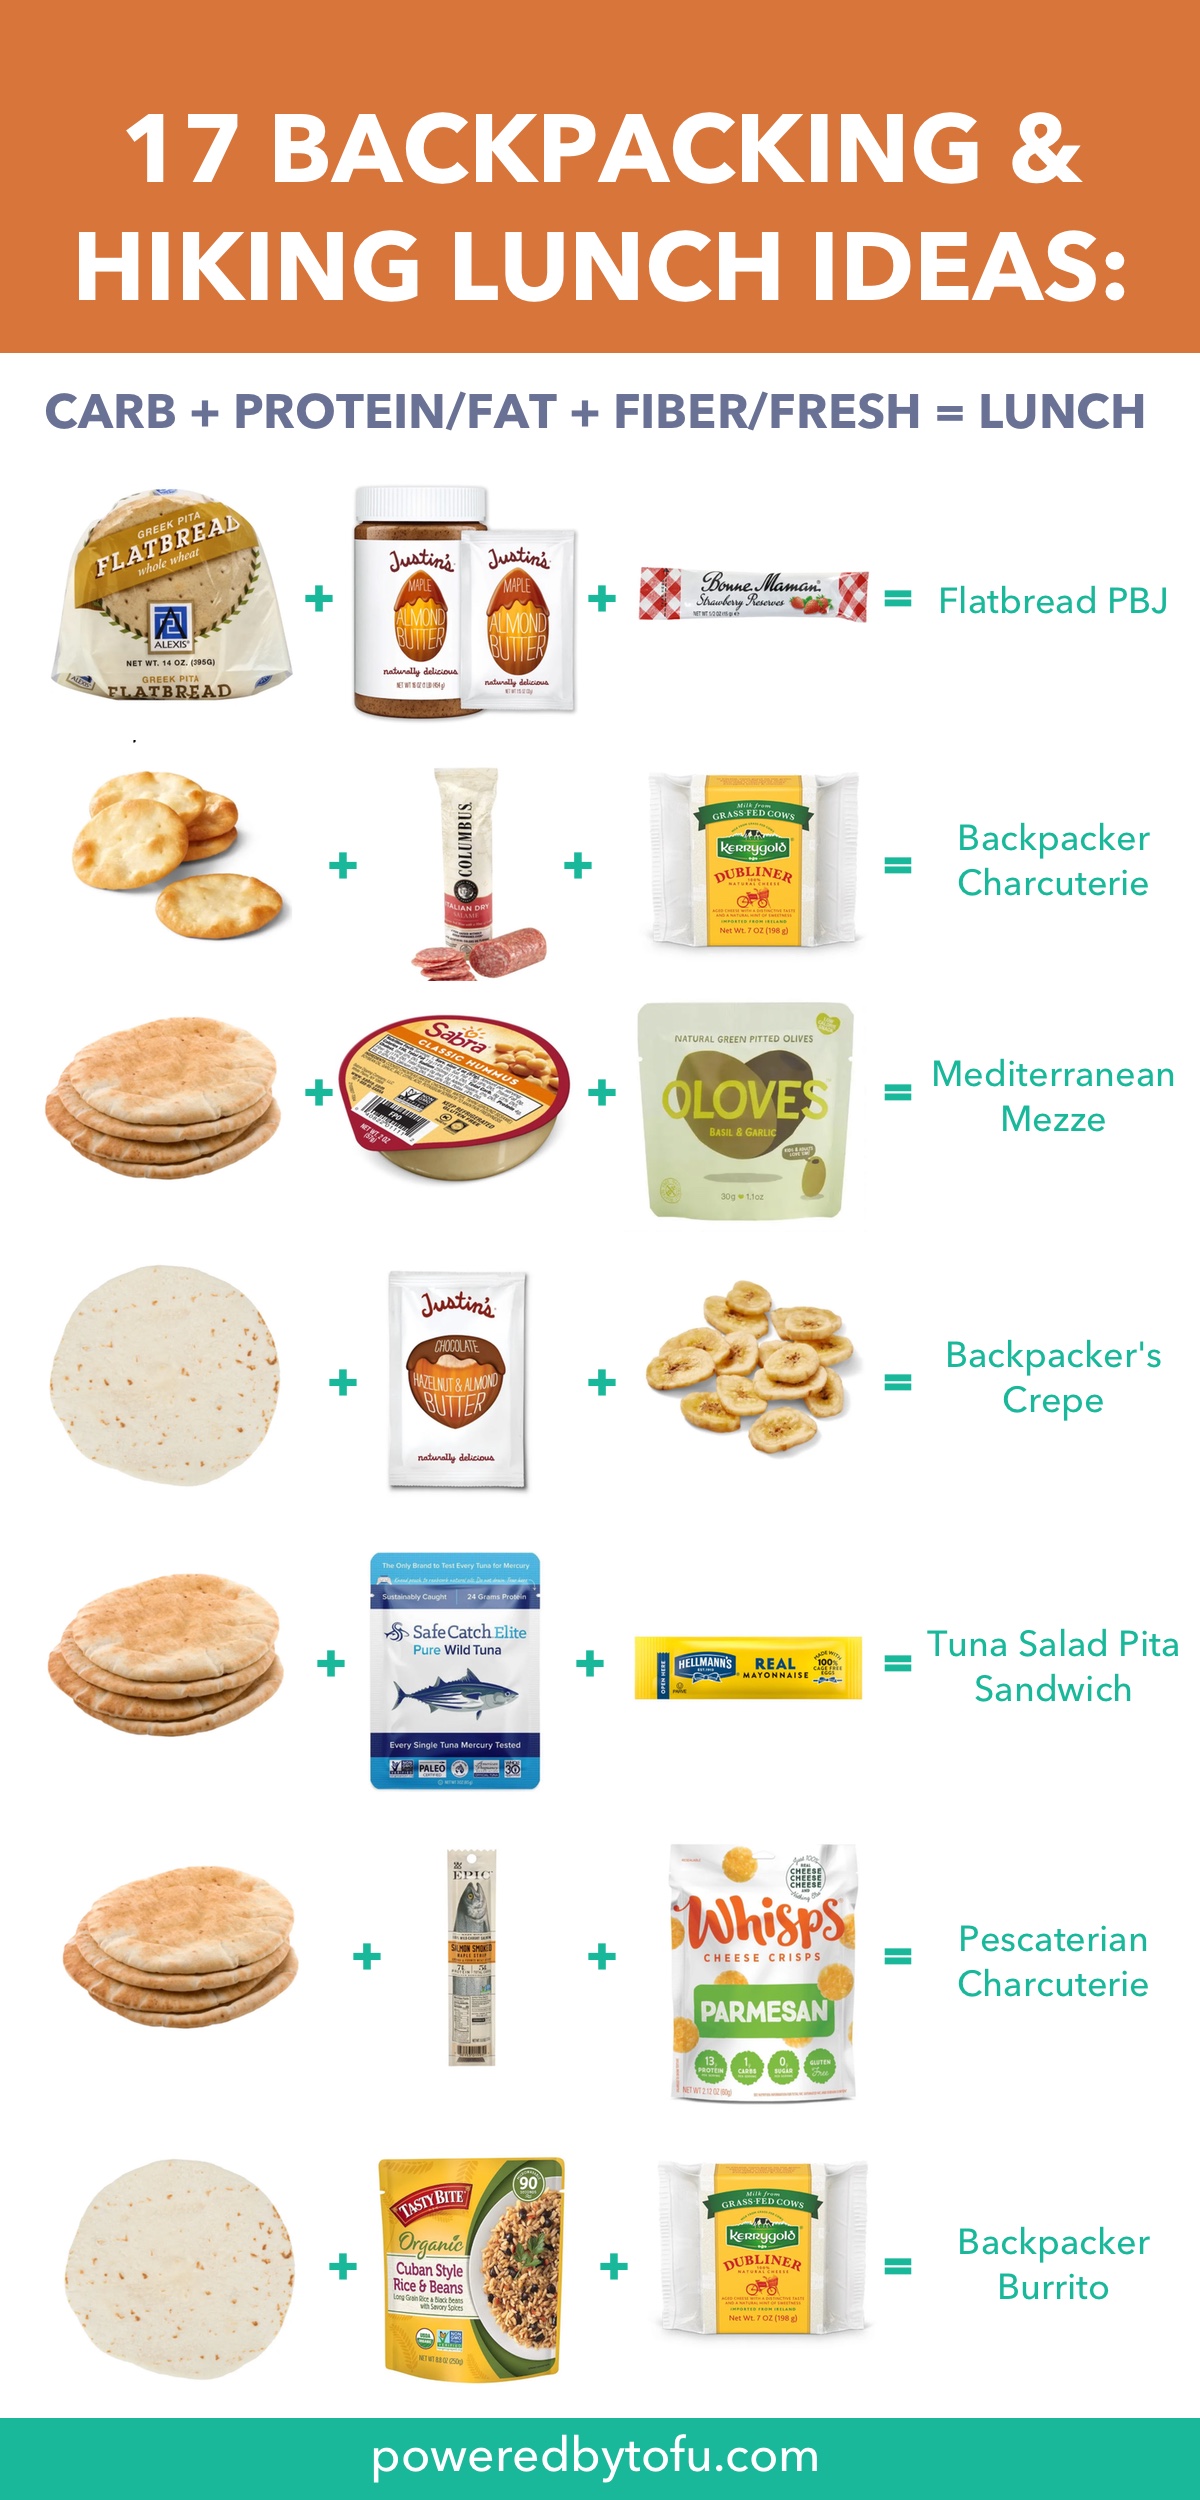 Backpacking lunch ideas